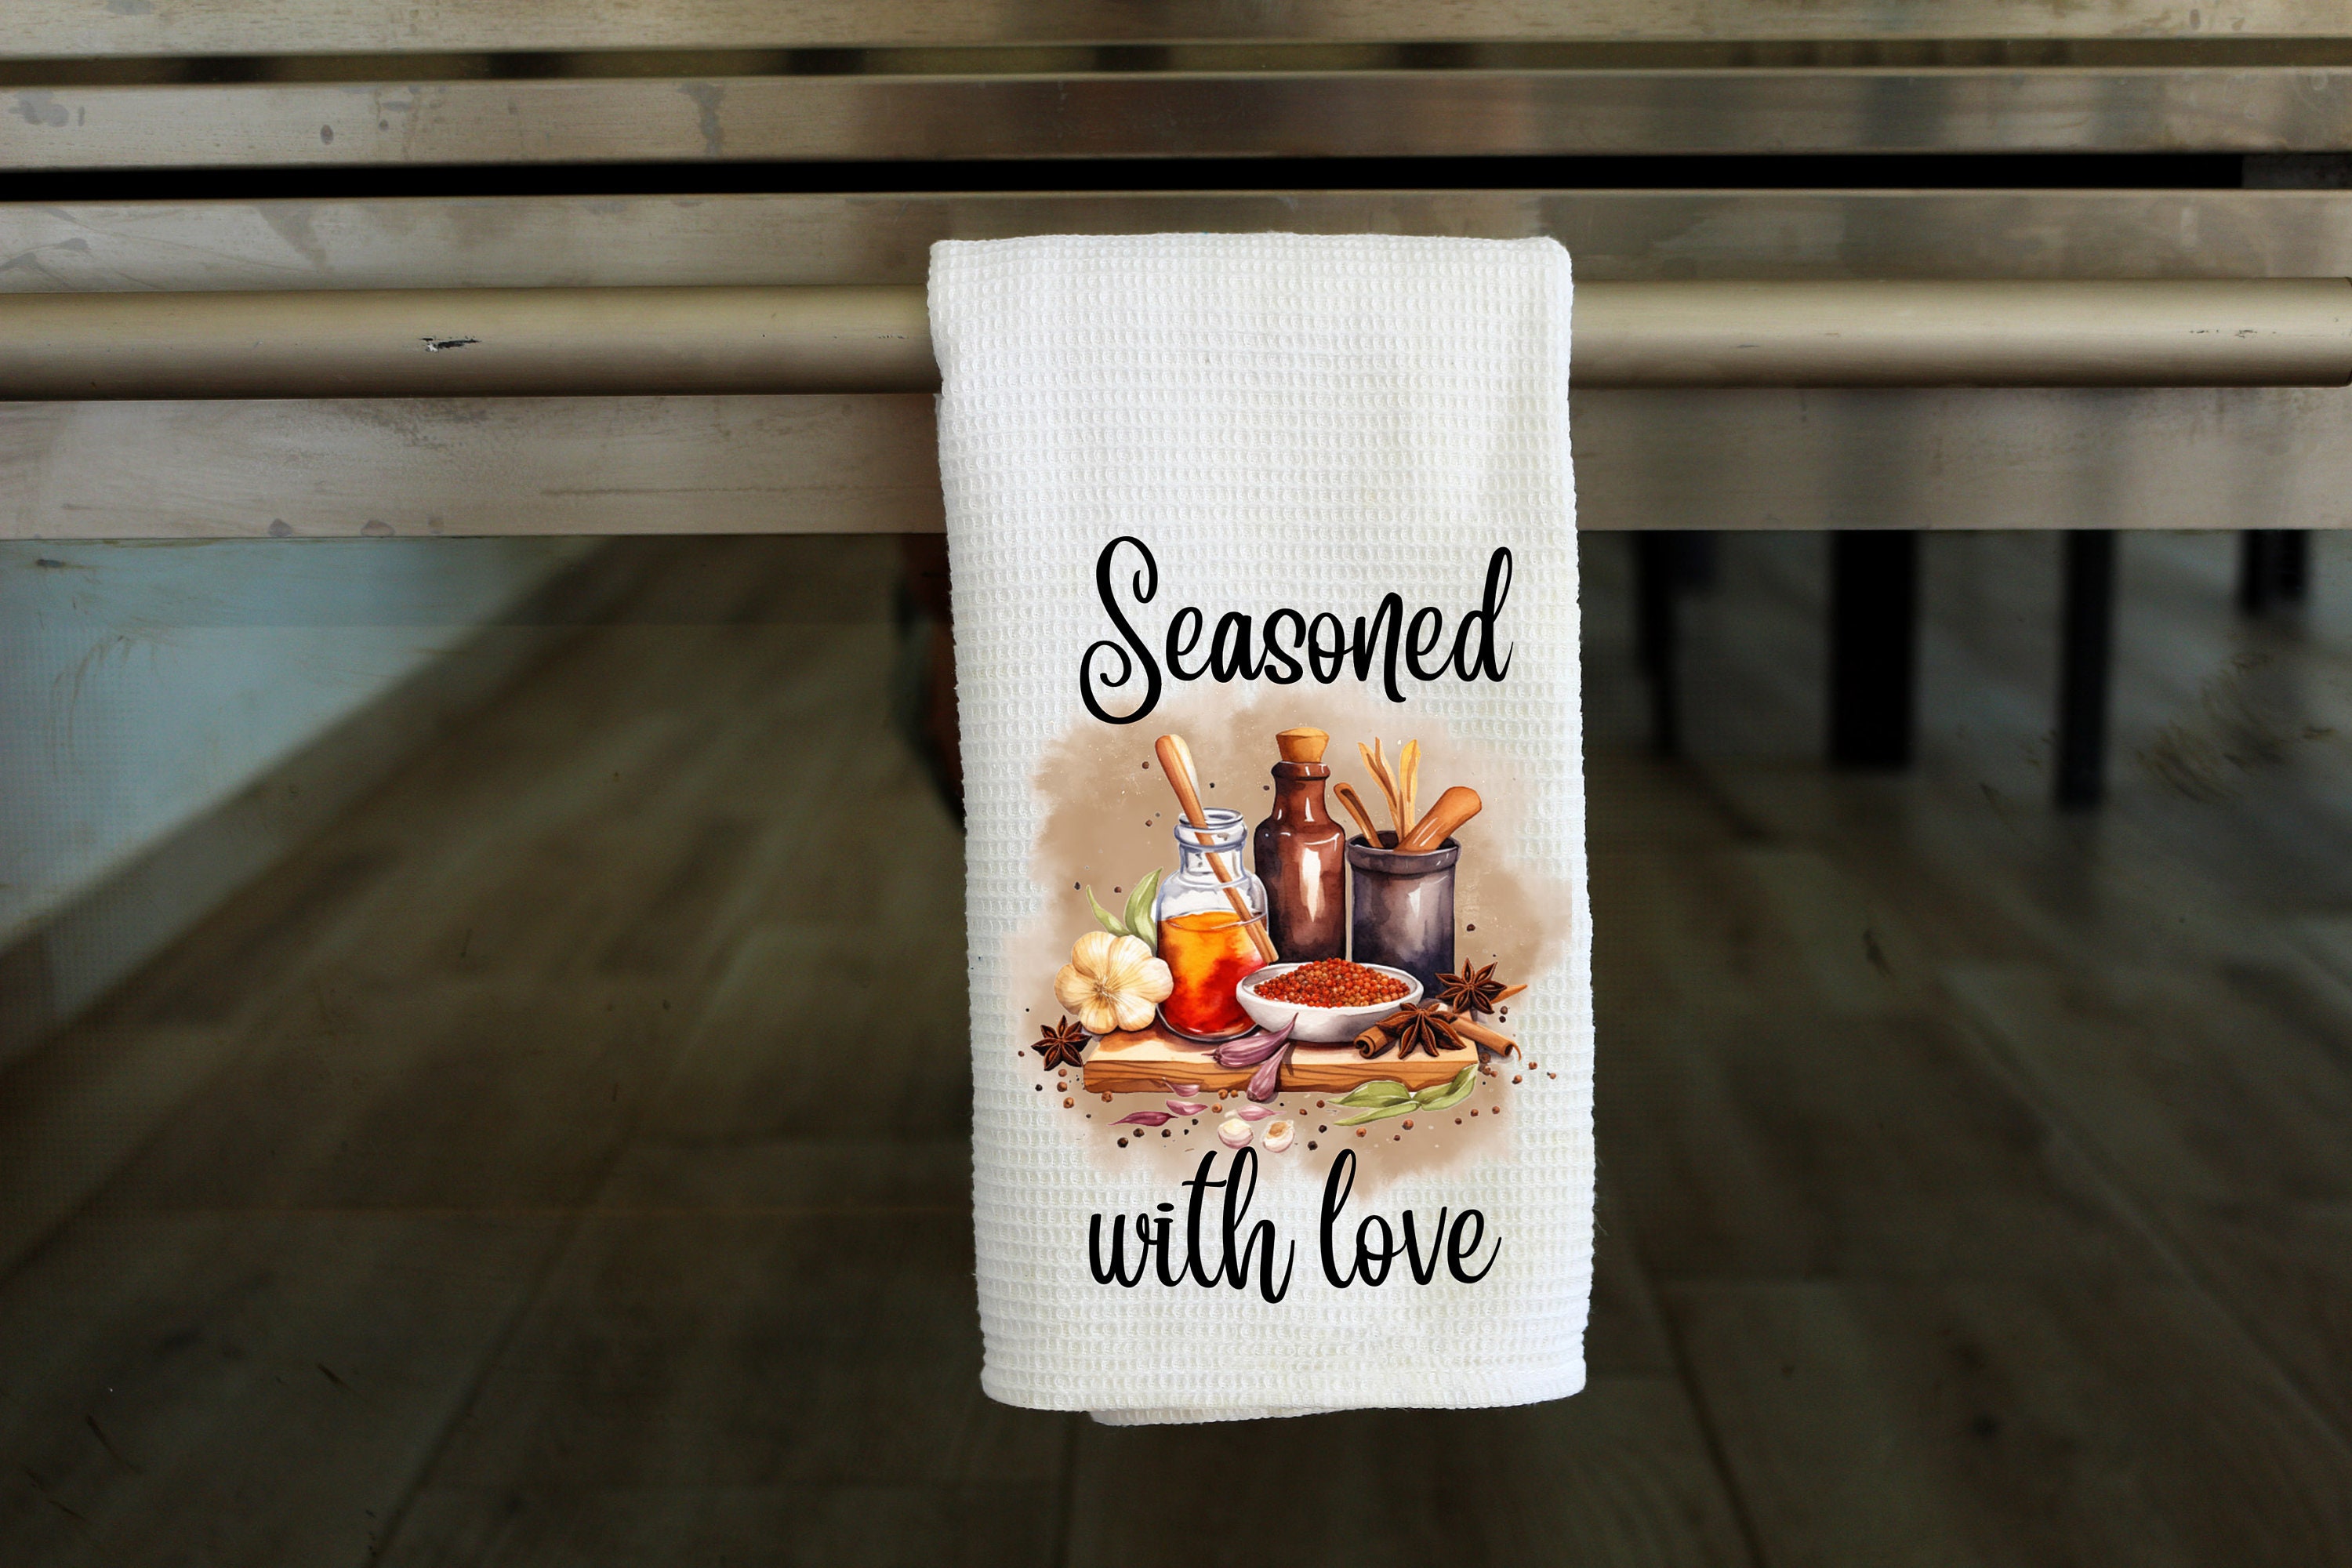 Chickgoton Sublimation All Over Hand Towel East Urban Home